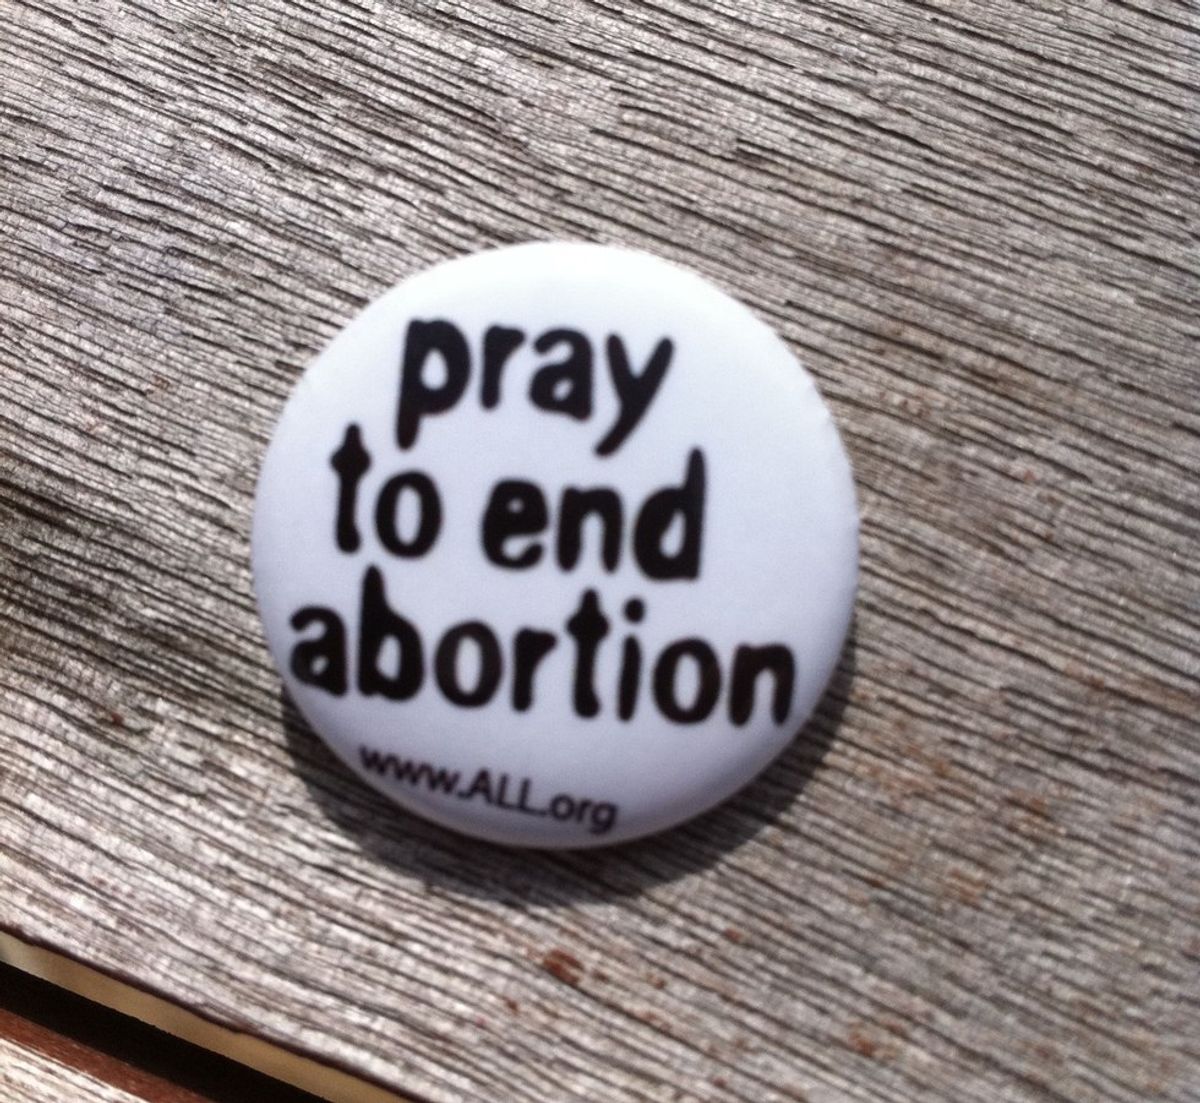 Why I Am Pro-Choice, But Still "Pray To End Abortion"